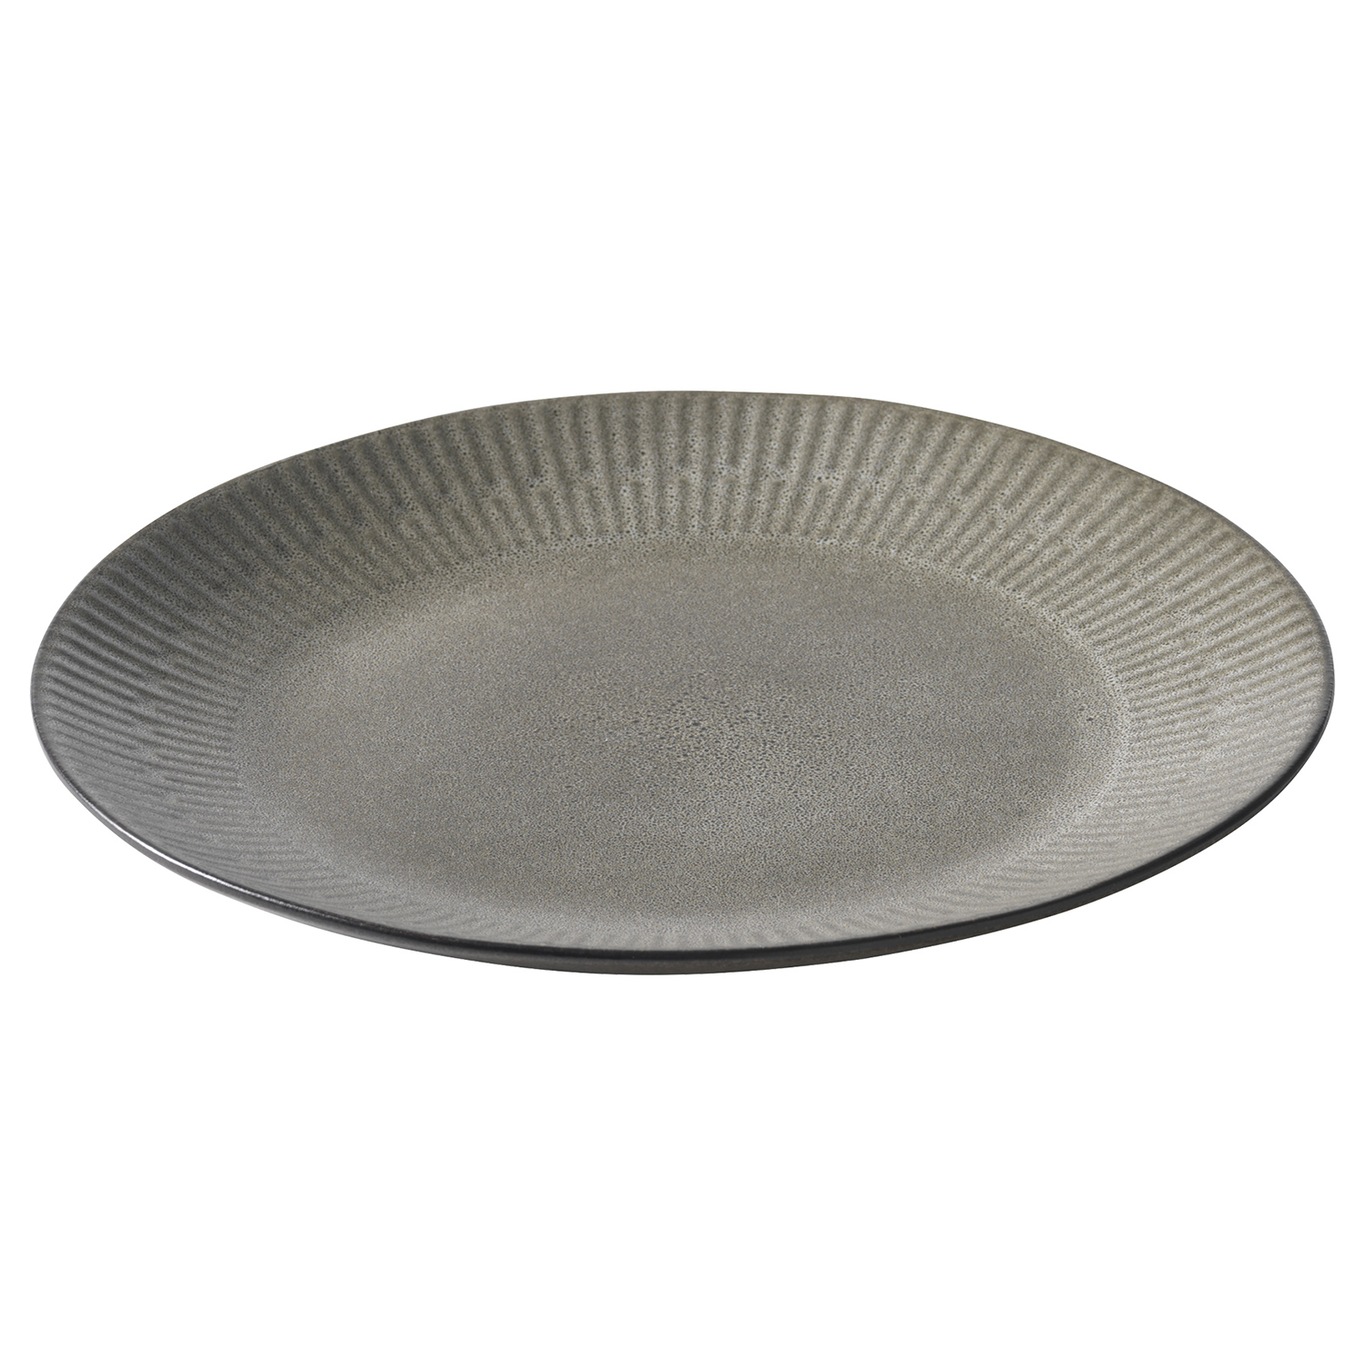 Relief Plate 22 cm, Grey